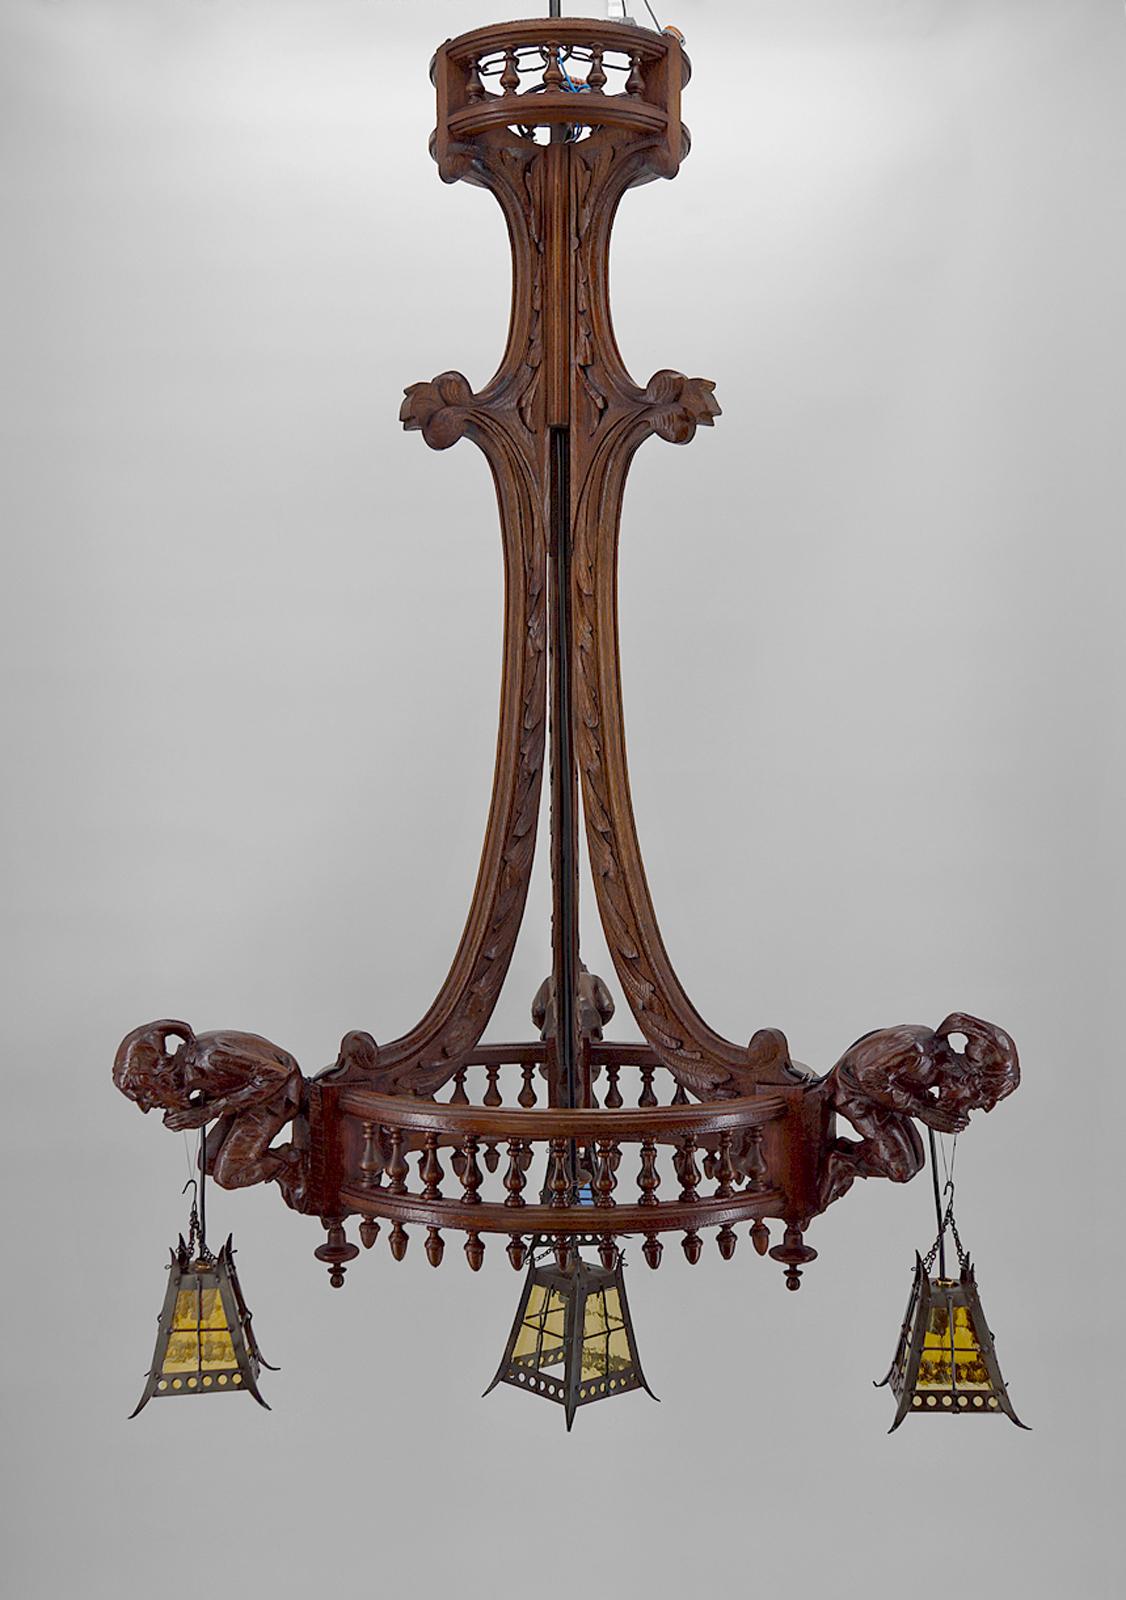 Imposing chandelier / suspension / pendant in oak, composed of 3 branches with at the end of each a jester / buffoon holding a lantern. The branches are joined by a turned wooden baluster.
The jesters are carved from basswood.
The lanterns are in